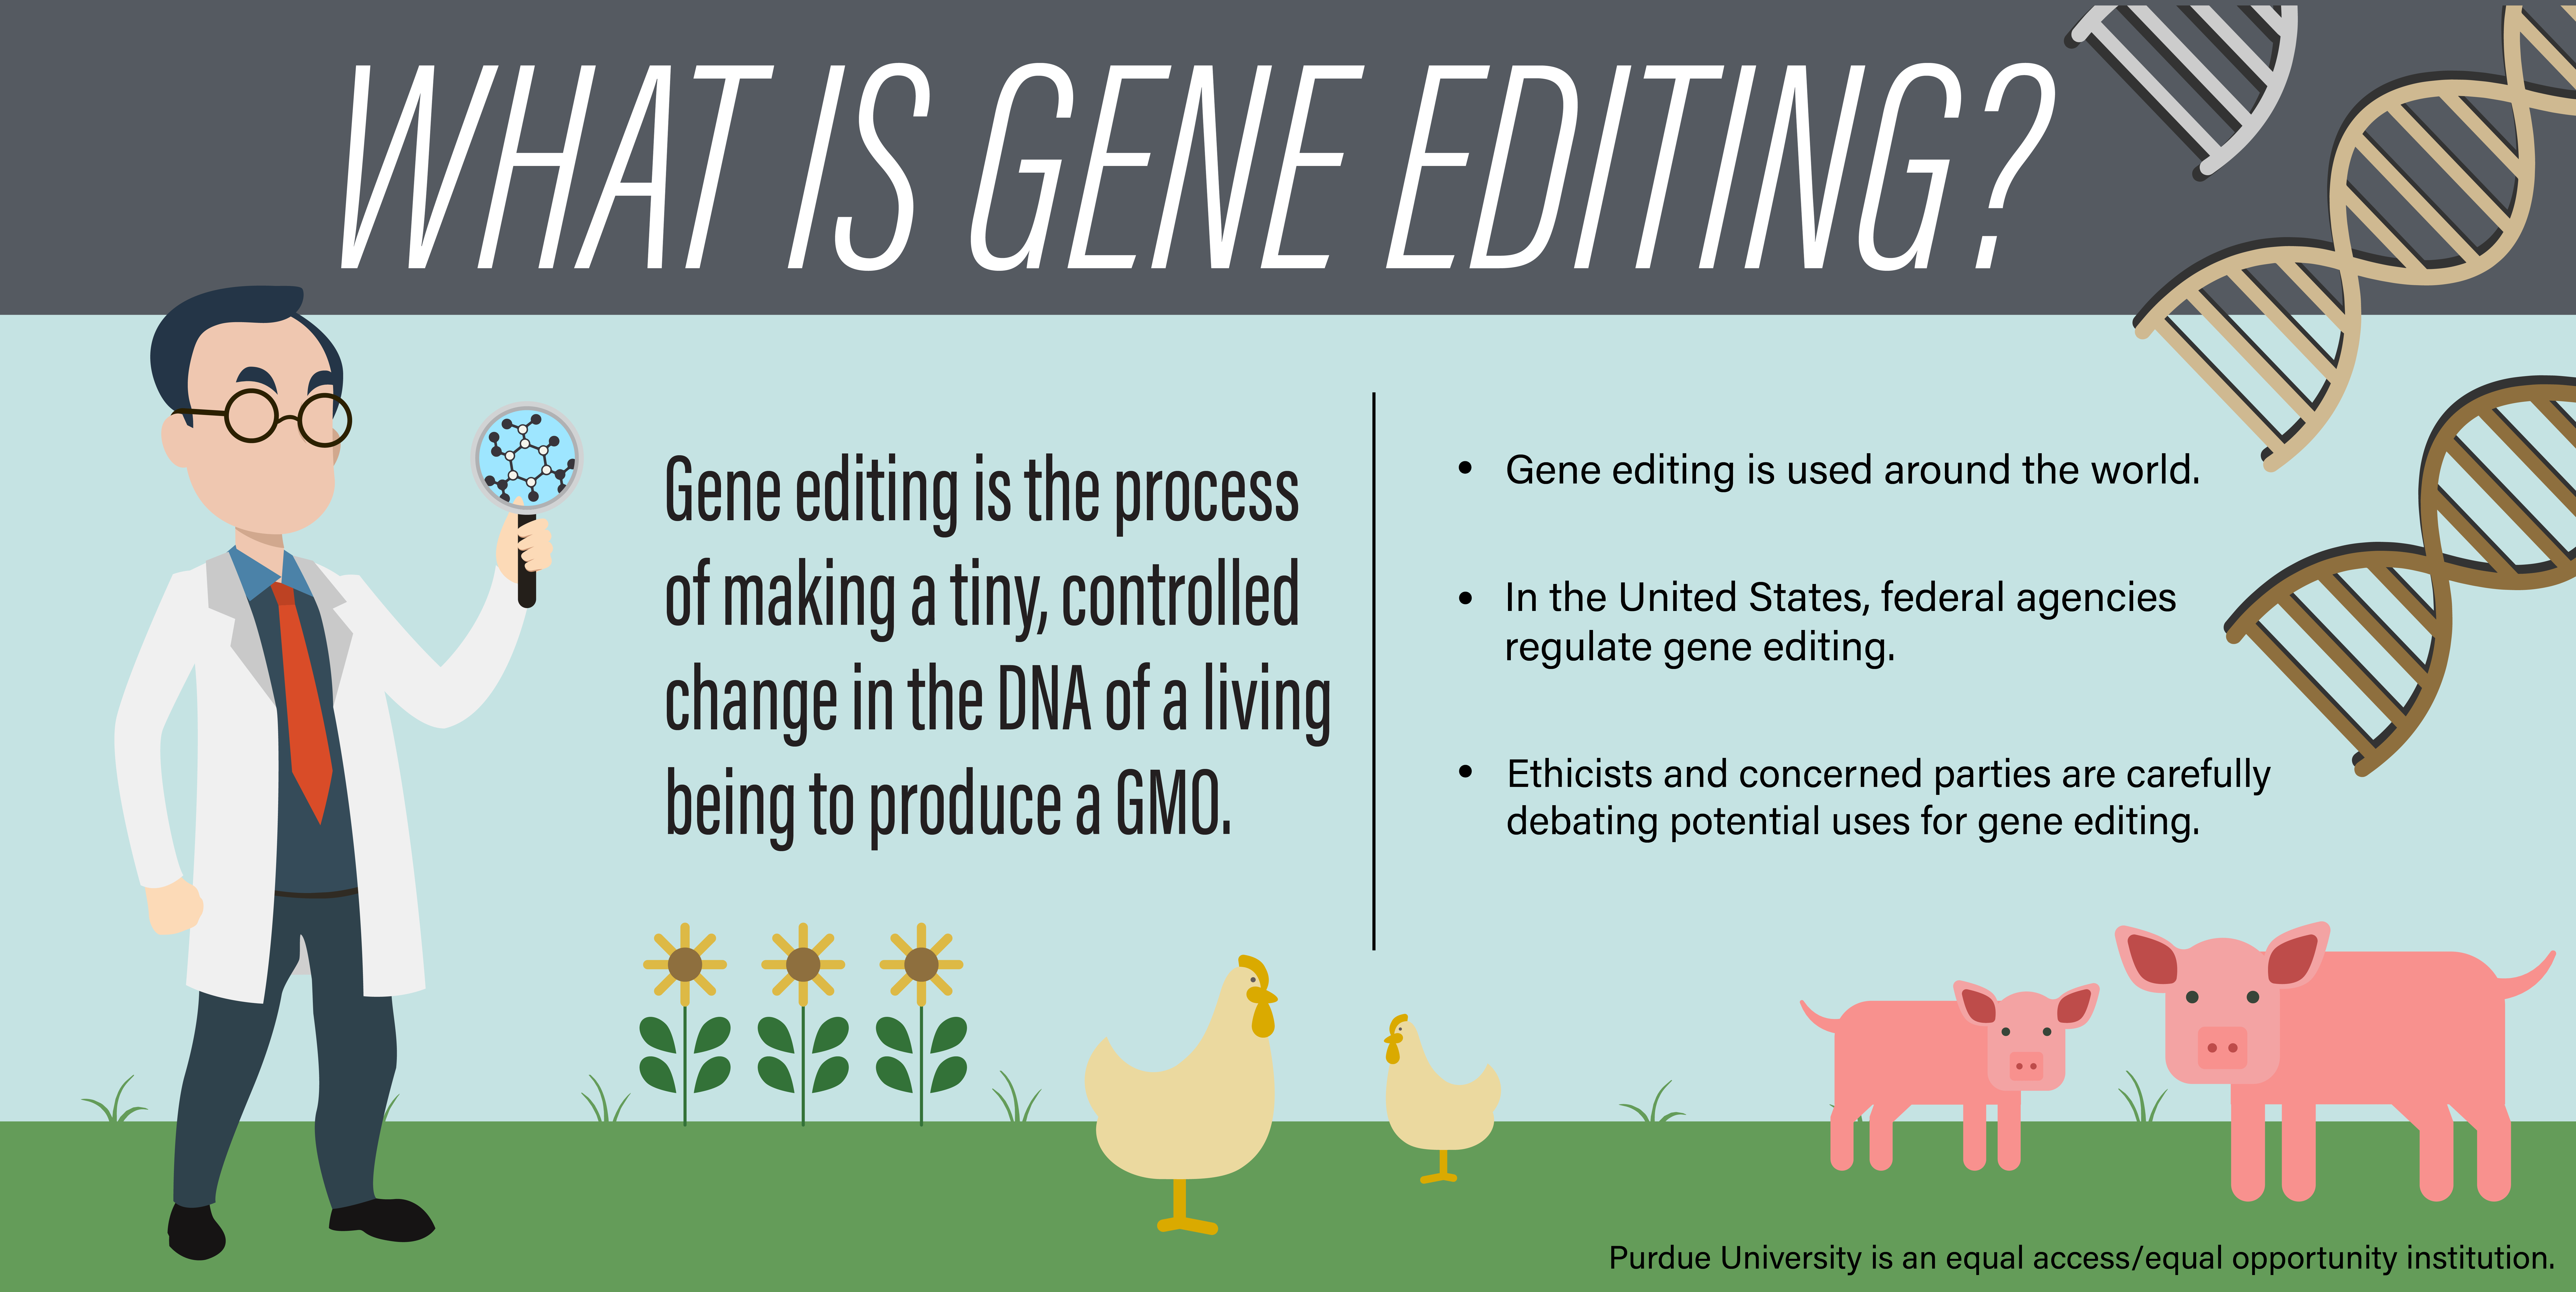 Gene editing graphic explanation. Gene editing is the process of making a tiny, controlled change in the DNA of a living being to produce a GMO. 